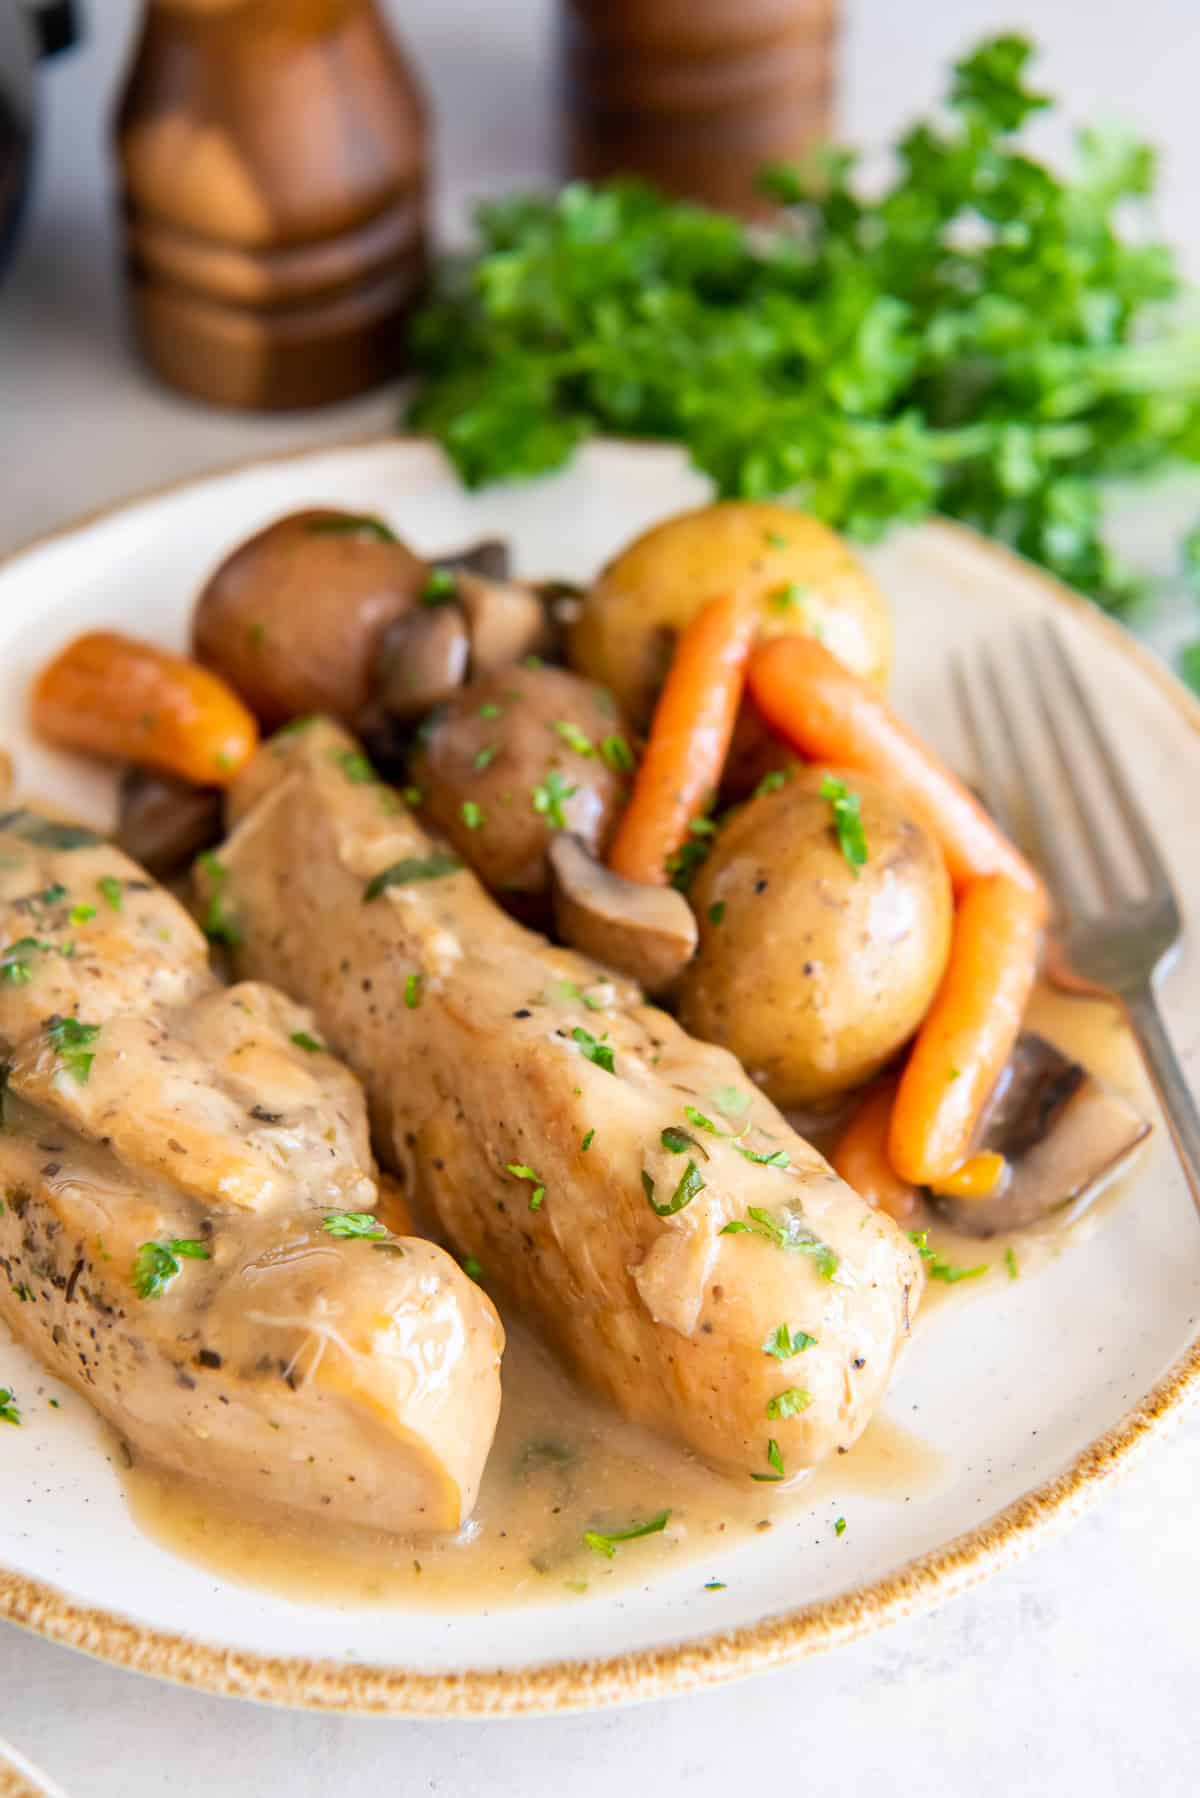 Two pieces of chicken on a plate with carrots, potatoes and covered with gravy.